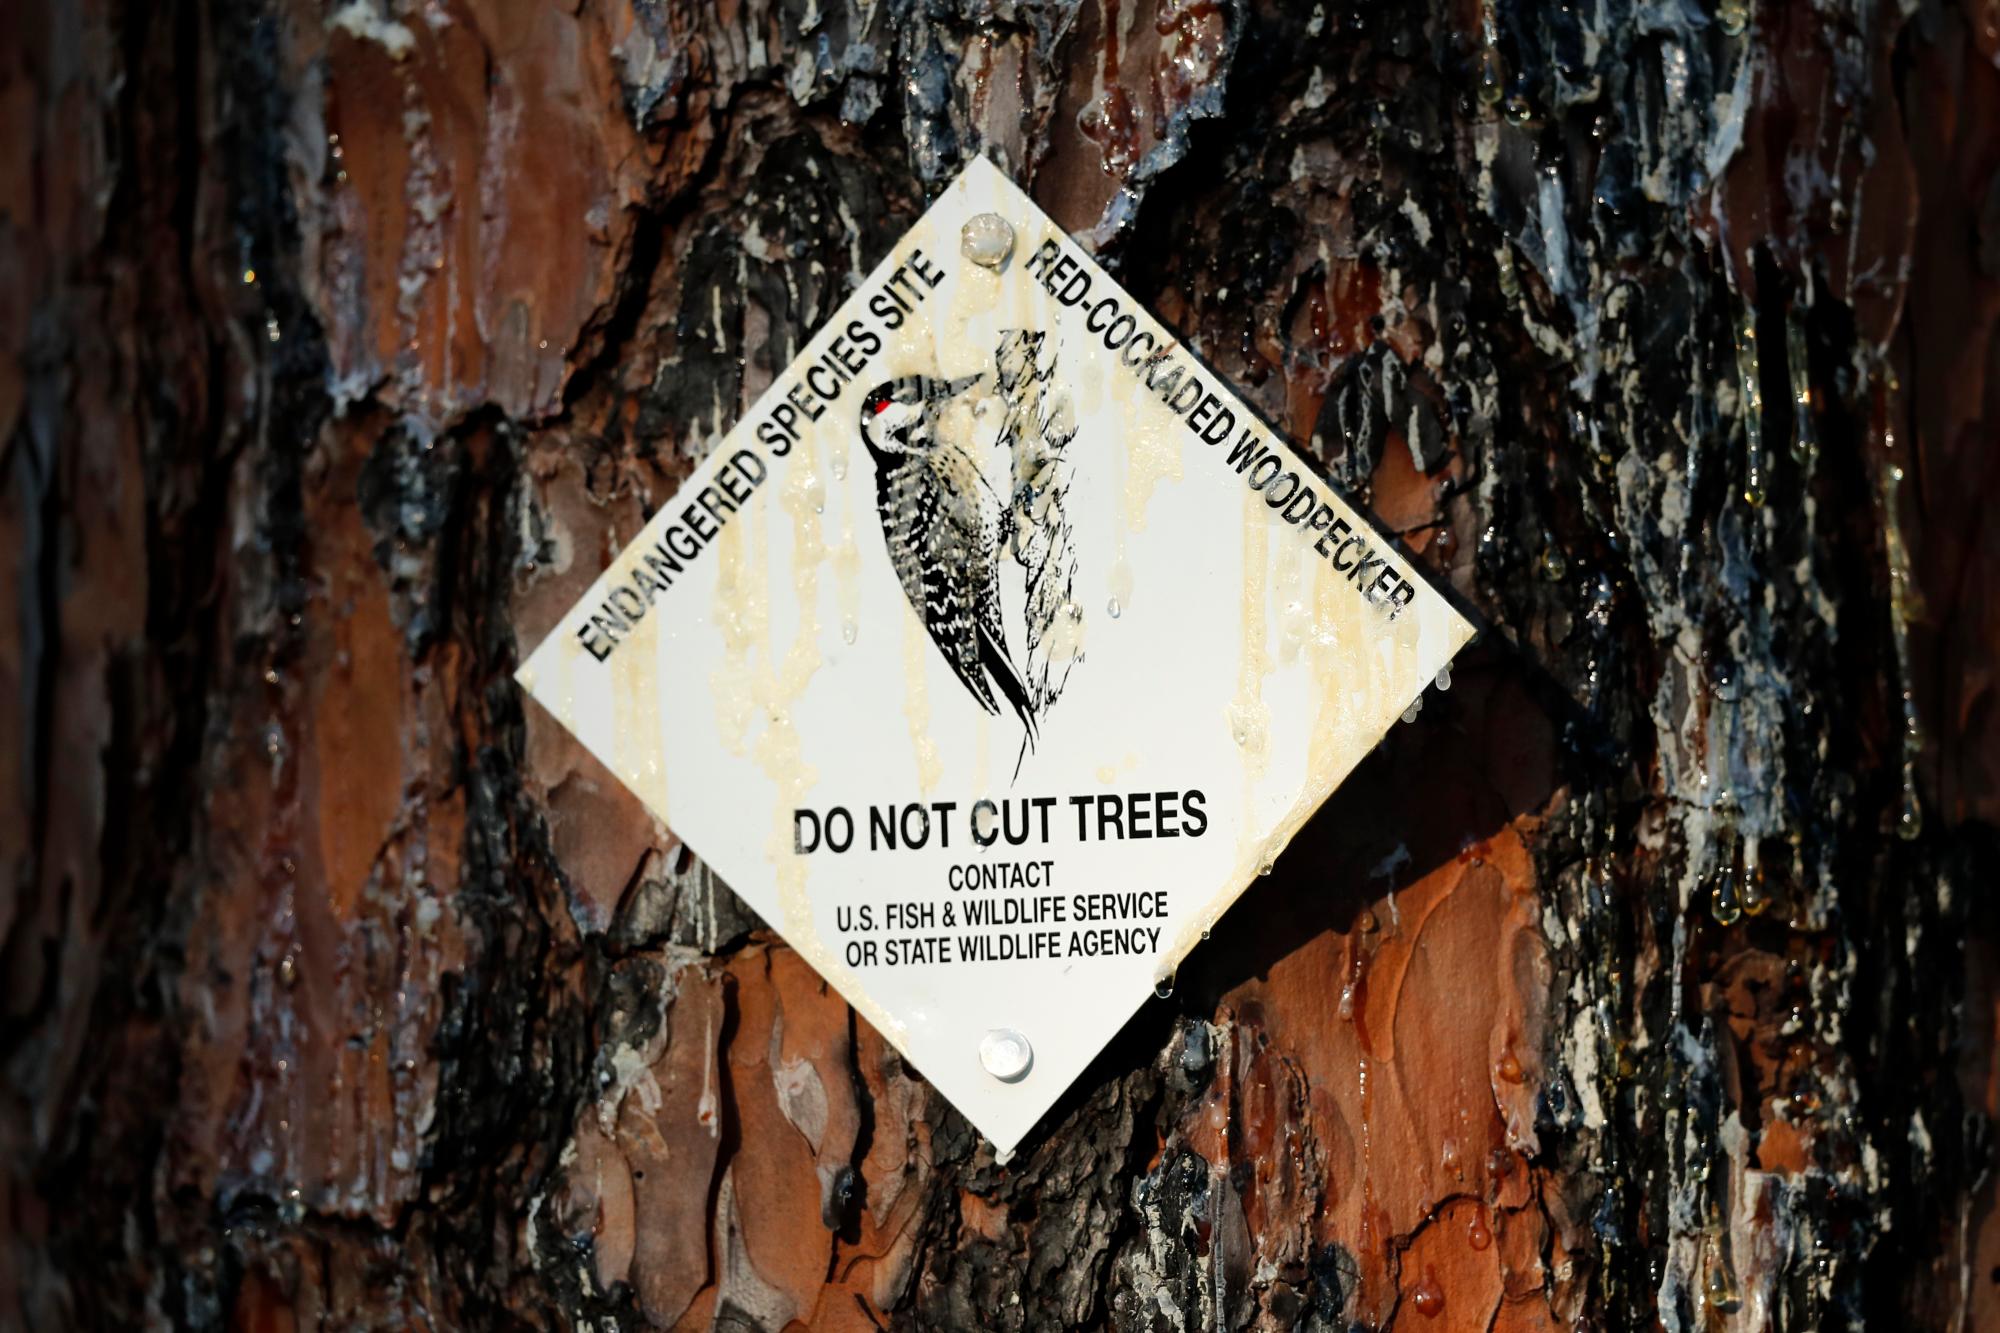  A sign indicates a tree used by a red-cockaded woodpecker in Southern Pines, N.C., on Tuesday, July 30, 2019. Unlike other woodpeckers, the red-cockaded woodpecker only nests and roosts in living long leaf pines. (AP Photo/Robert F. Bukaty)